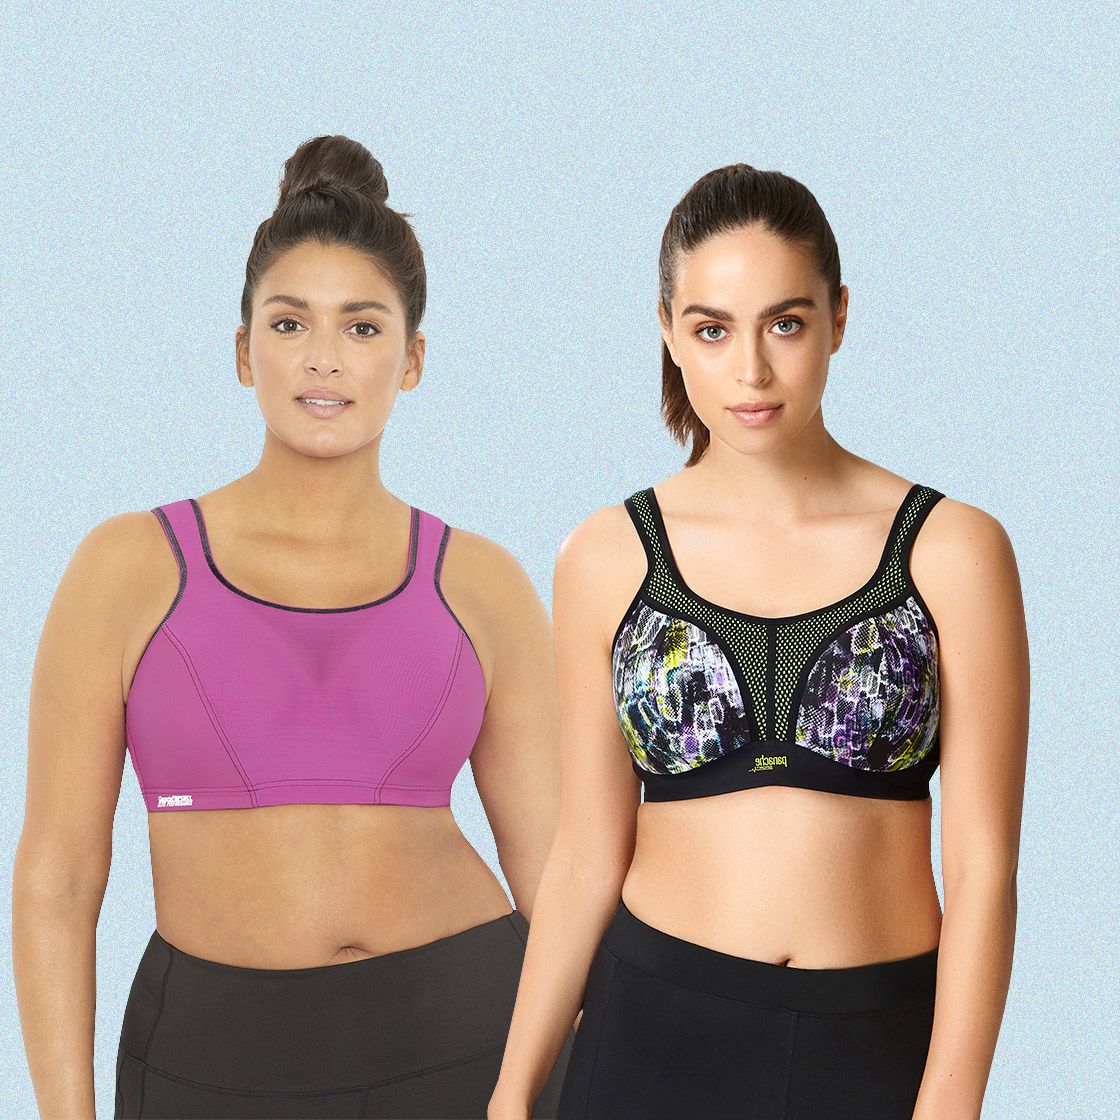 Why Adidas sports bra ban highlights the sexualisation of breasts